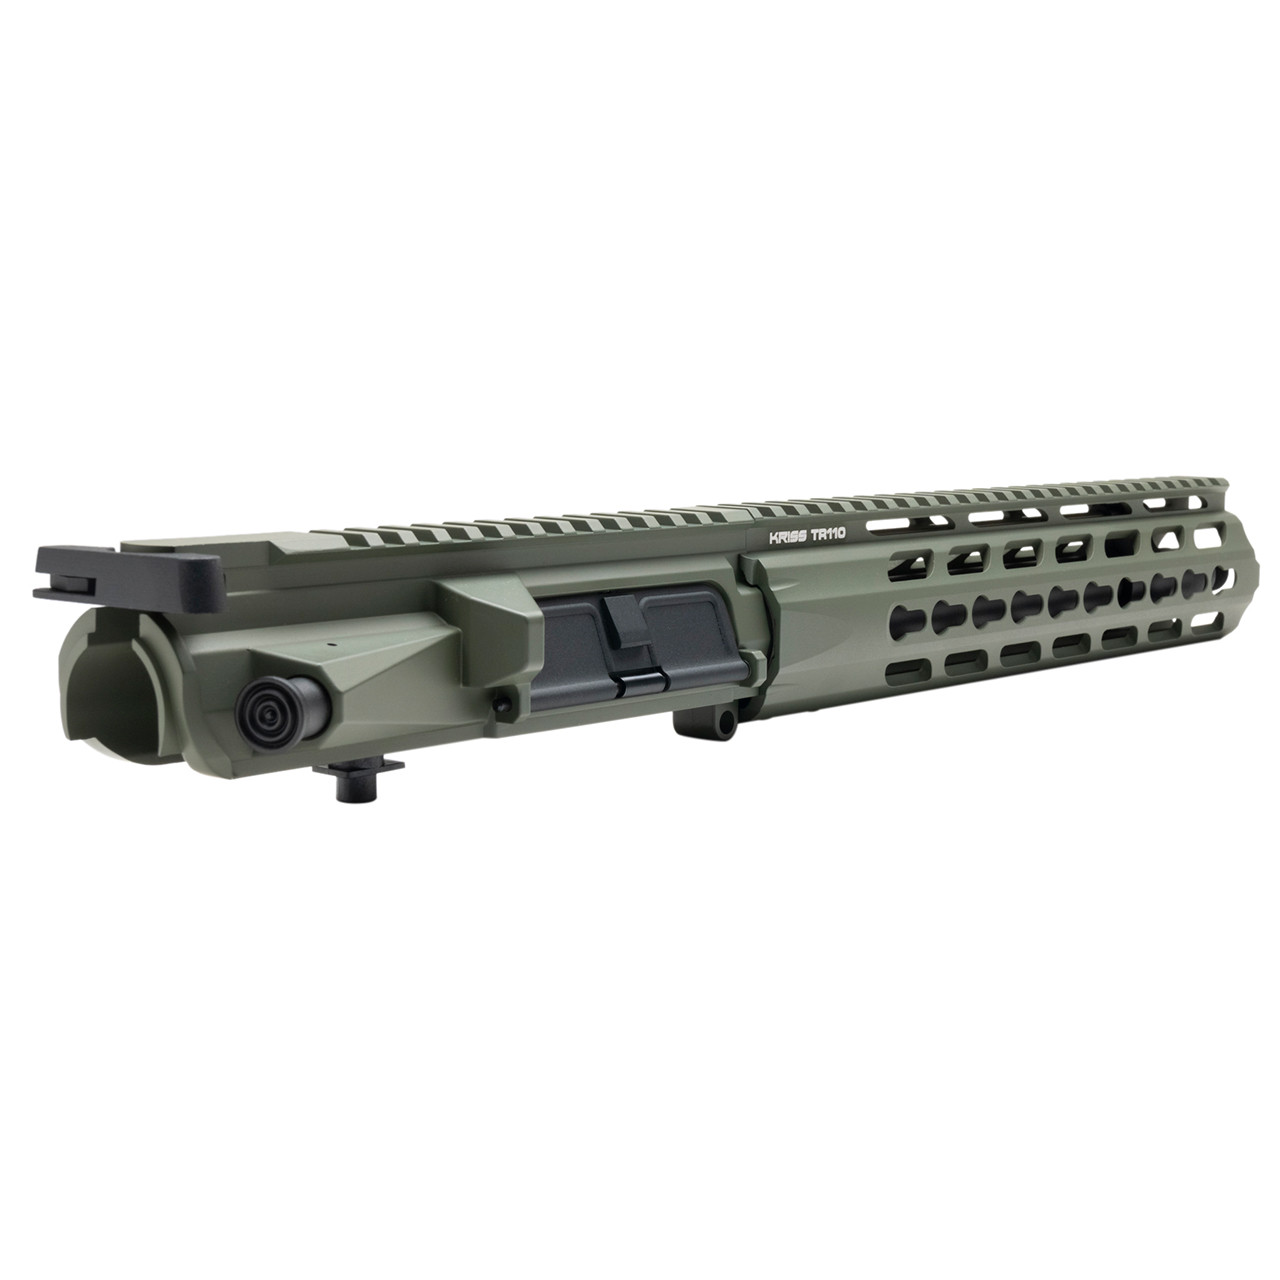 Shop Trident MK2 CRB Upper Receiver Assembly / FG - $ 210 - Krytac.com | For Airsoft Use Only.